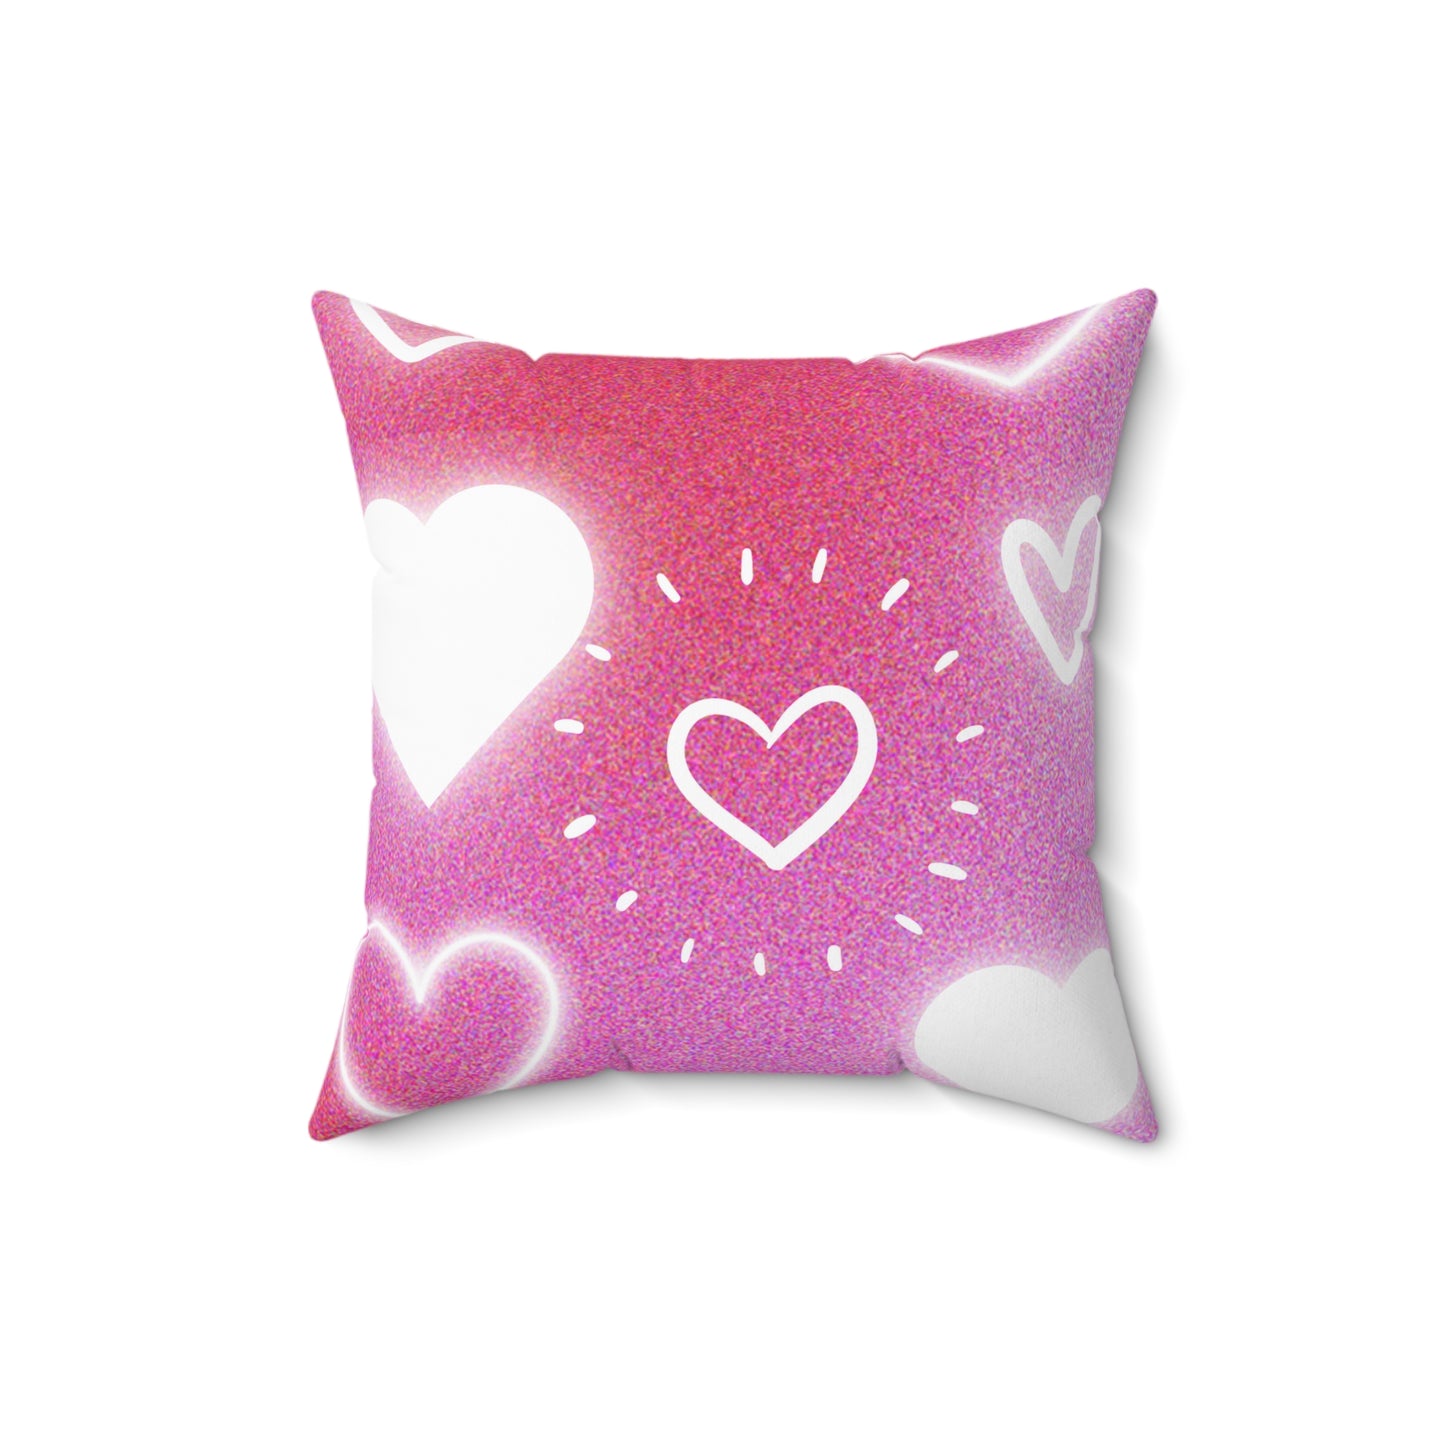 Glow Pink and White Heart Vibes Square Pillow Multiple Sizes